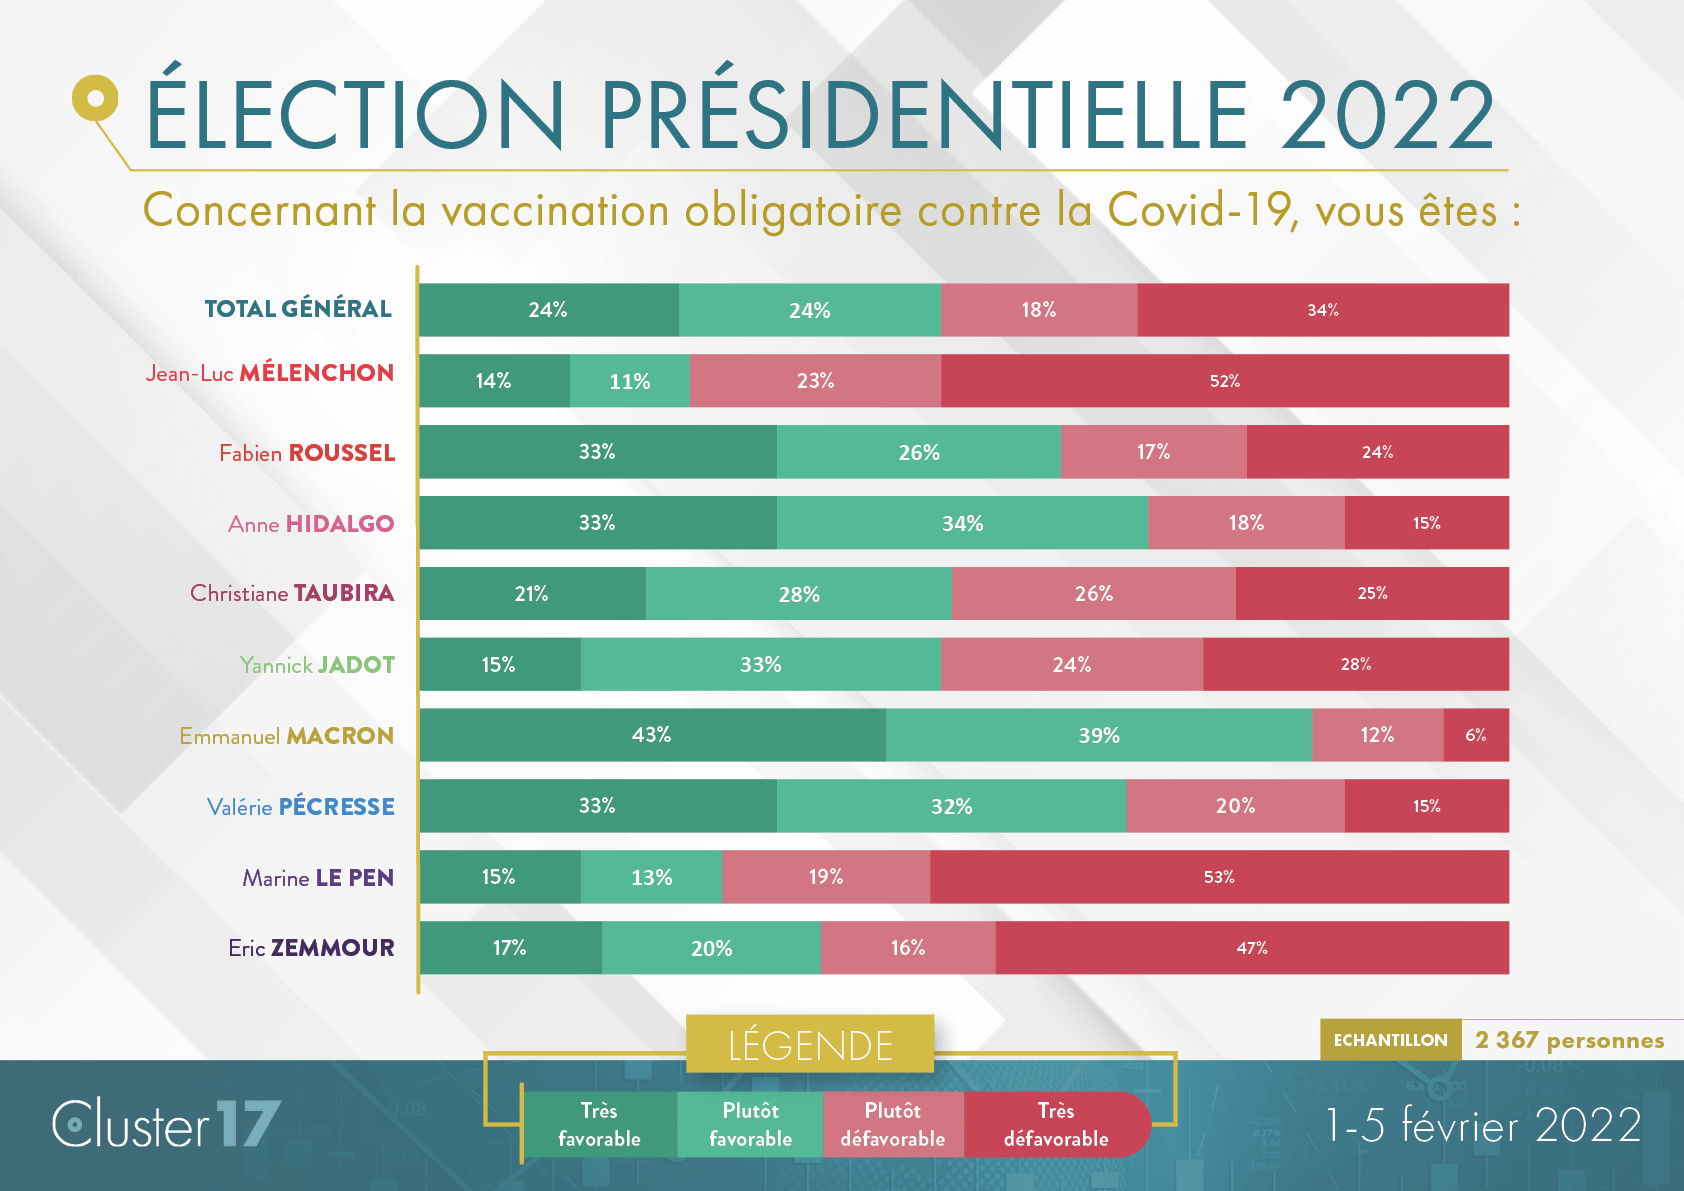 Cluster17_Rolling hebdomadaire_Vaccination obligatoire_Candidats